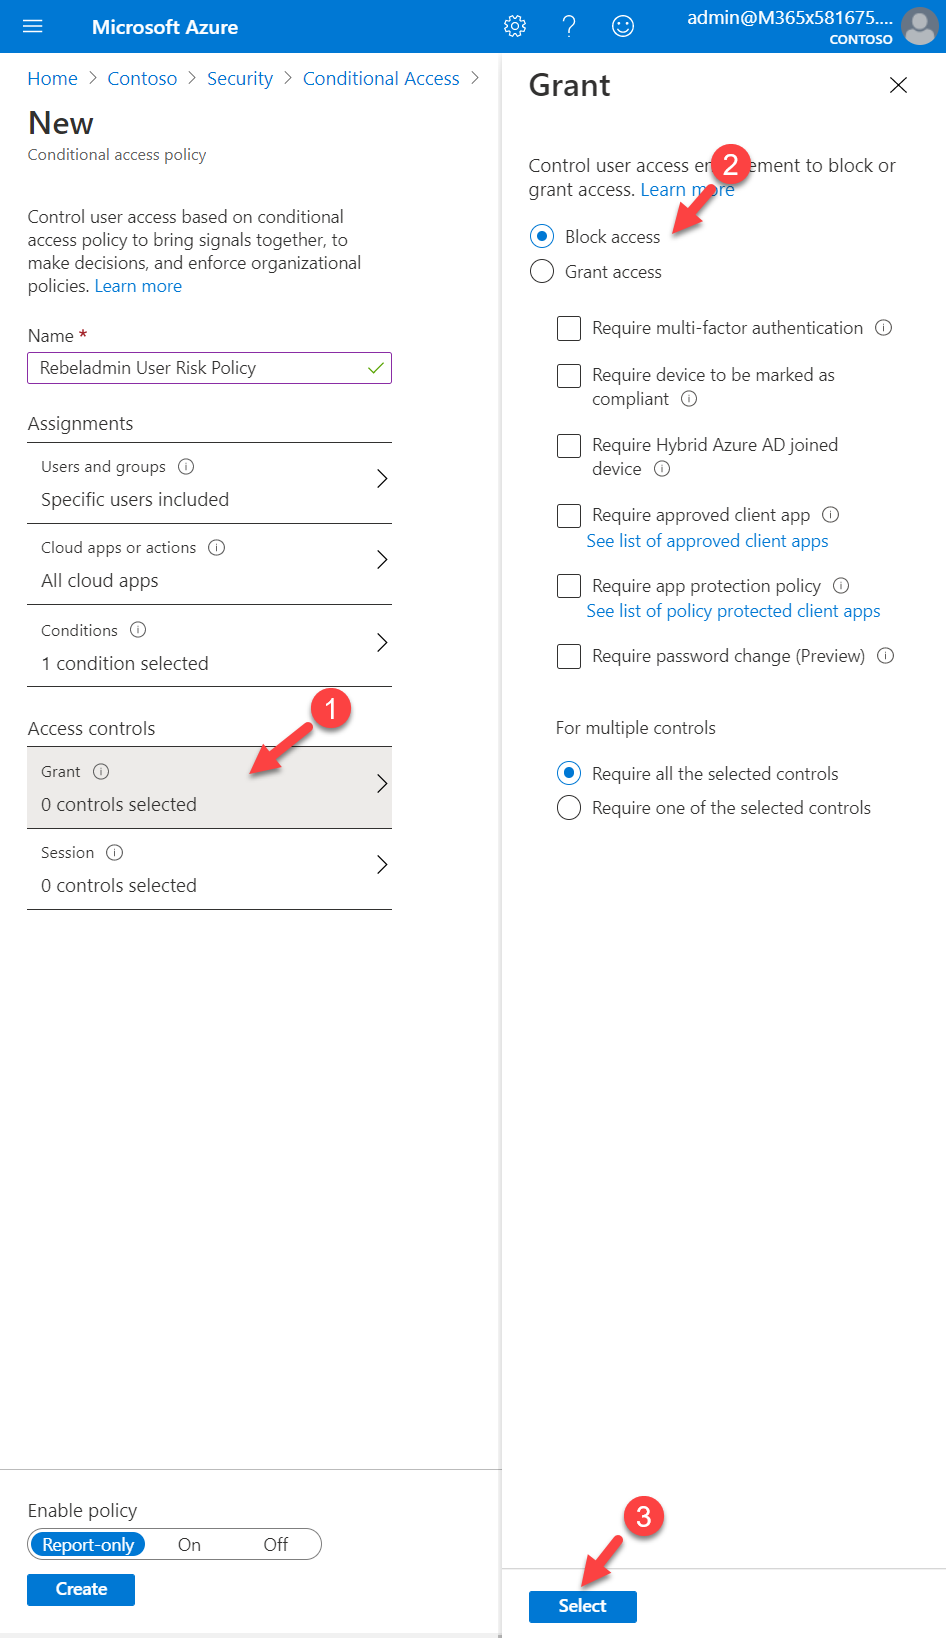 Conditional access policy access control settings